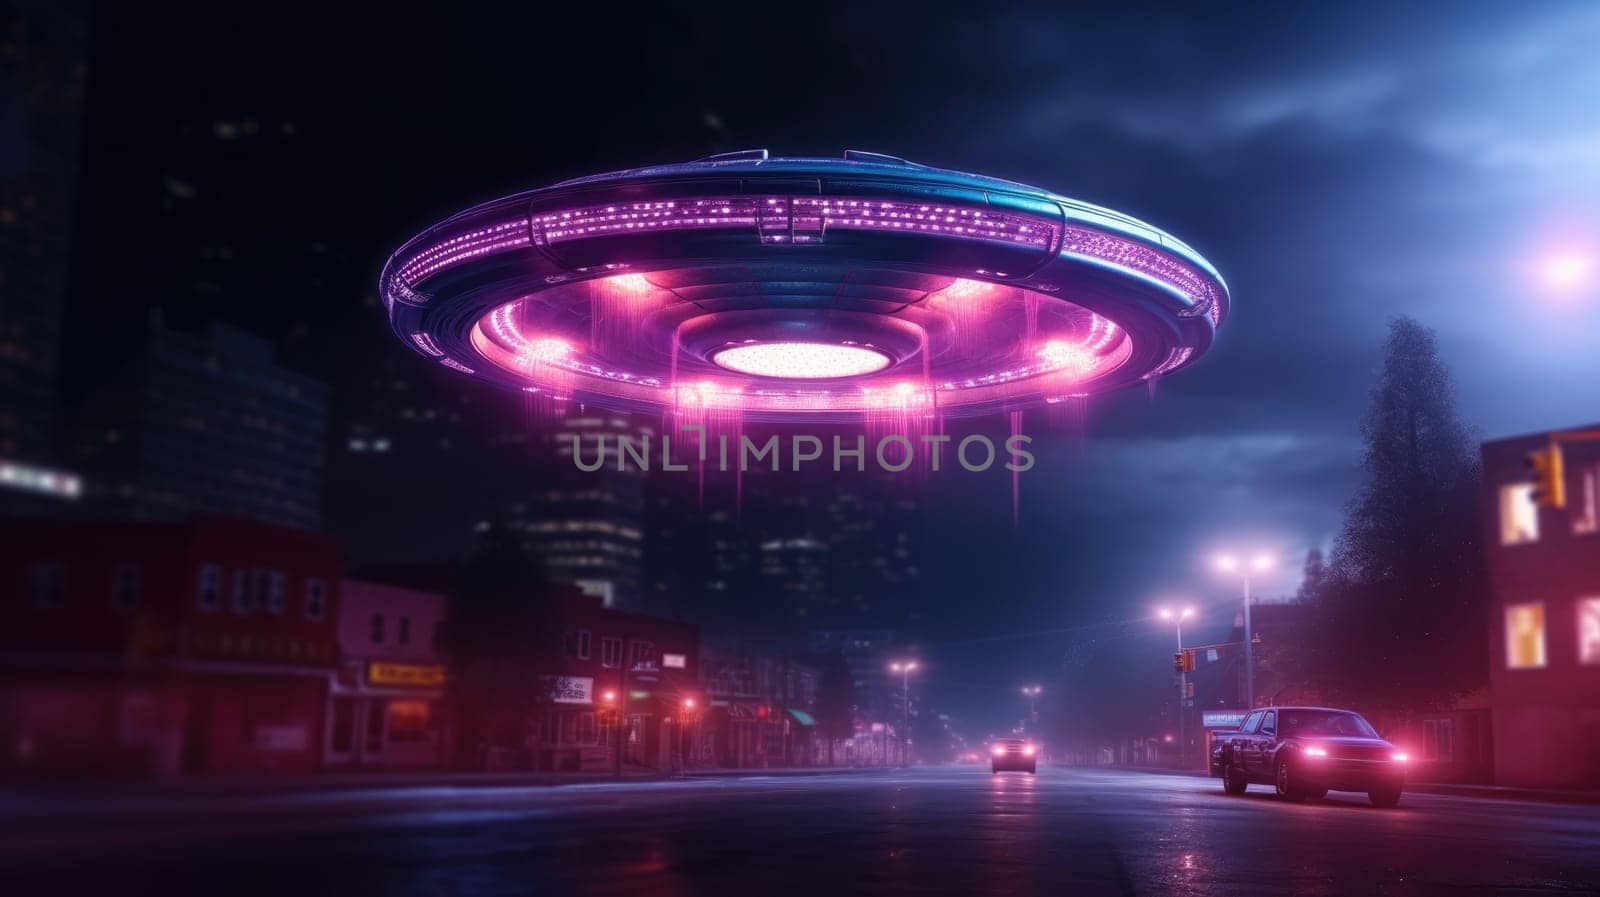 Flying UFO over the night city street with retro neon light vibes style. by JuliaDorian